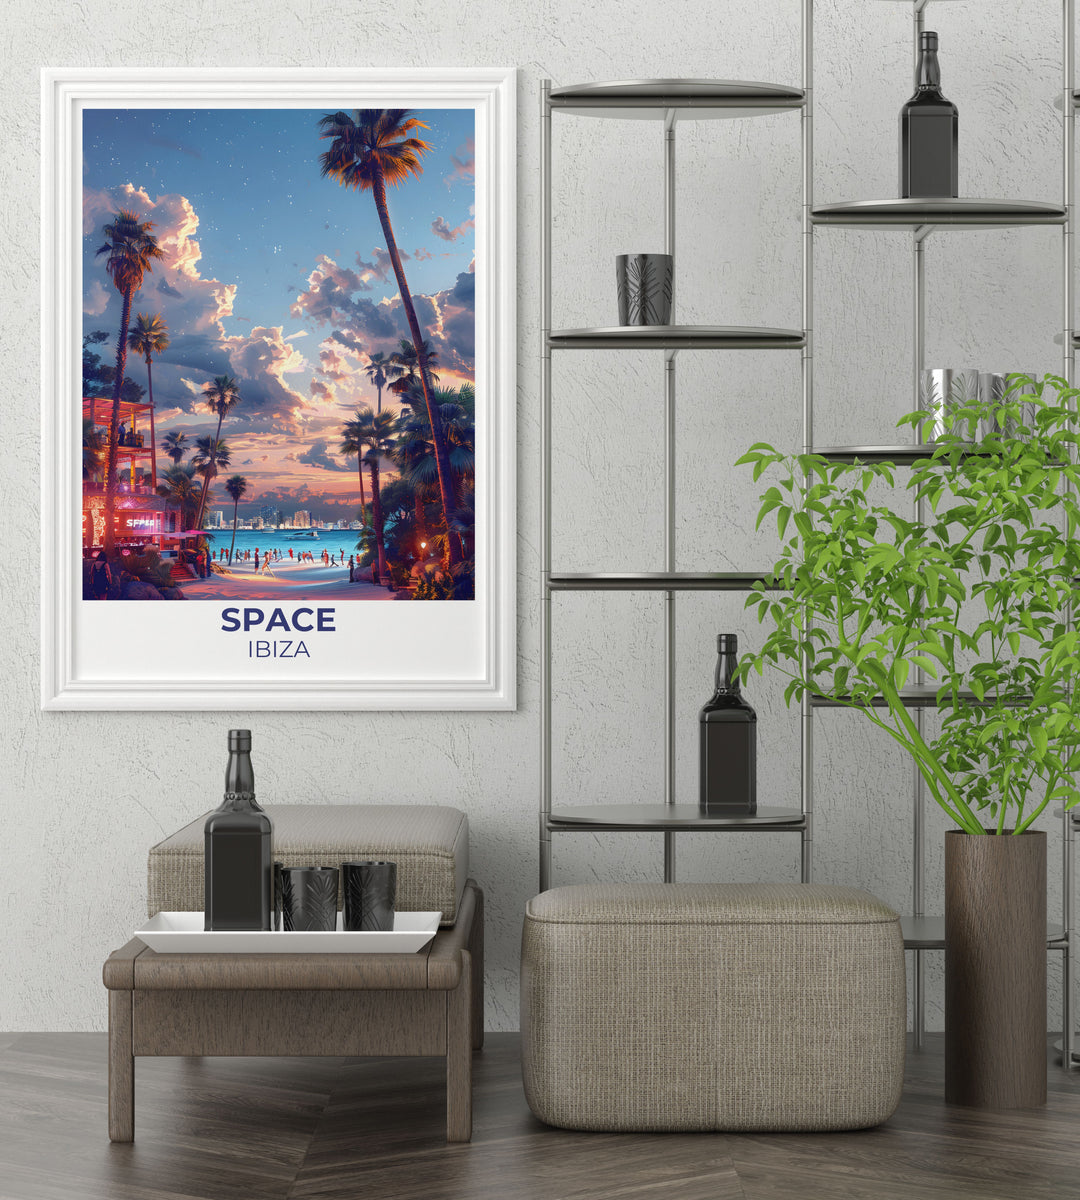 The Terrace Wall Art brings the dynamic energy of Space Nightclub into your home. The scene features a packed dance floor under bright lights, showcasing the excitement and vibrancy of Ibizas iconic clubbing experience.